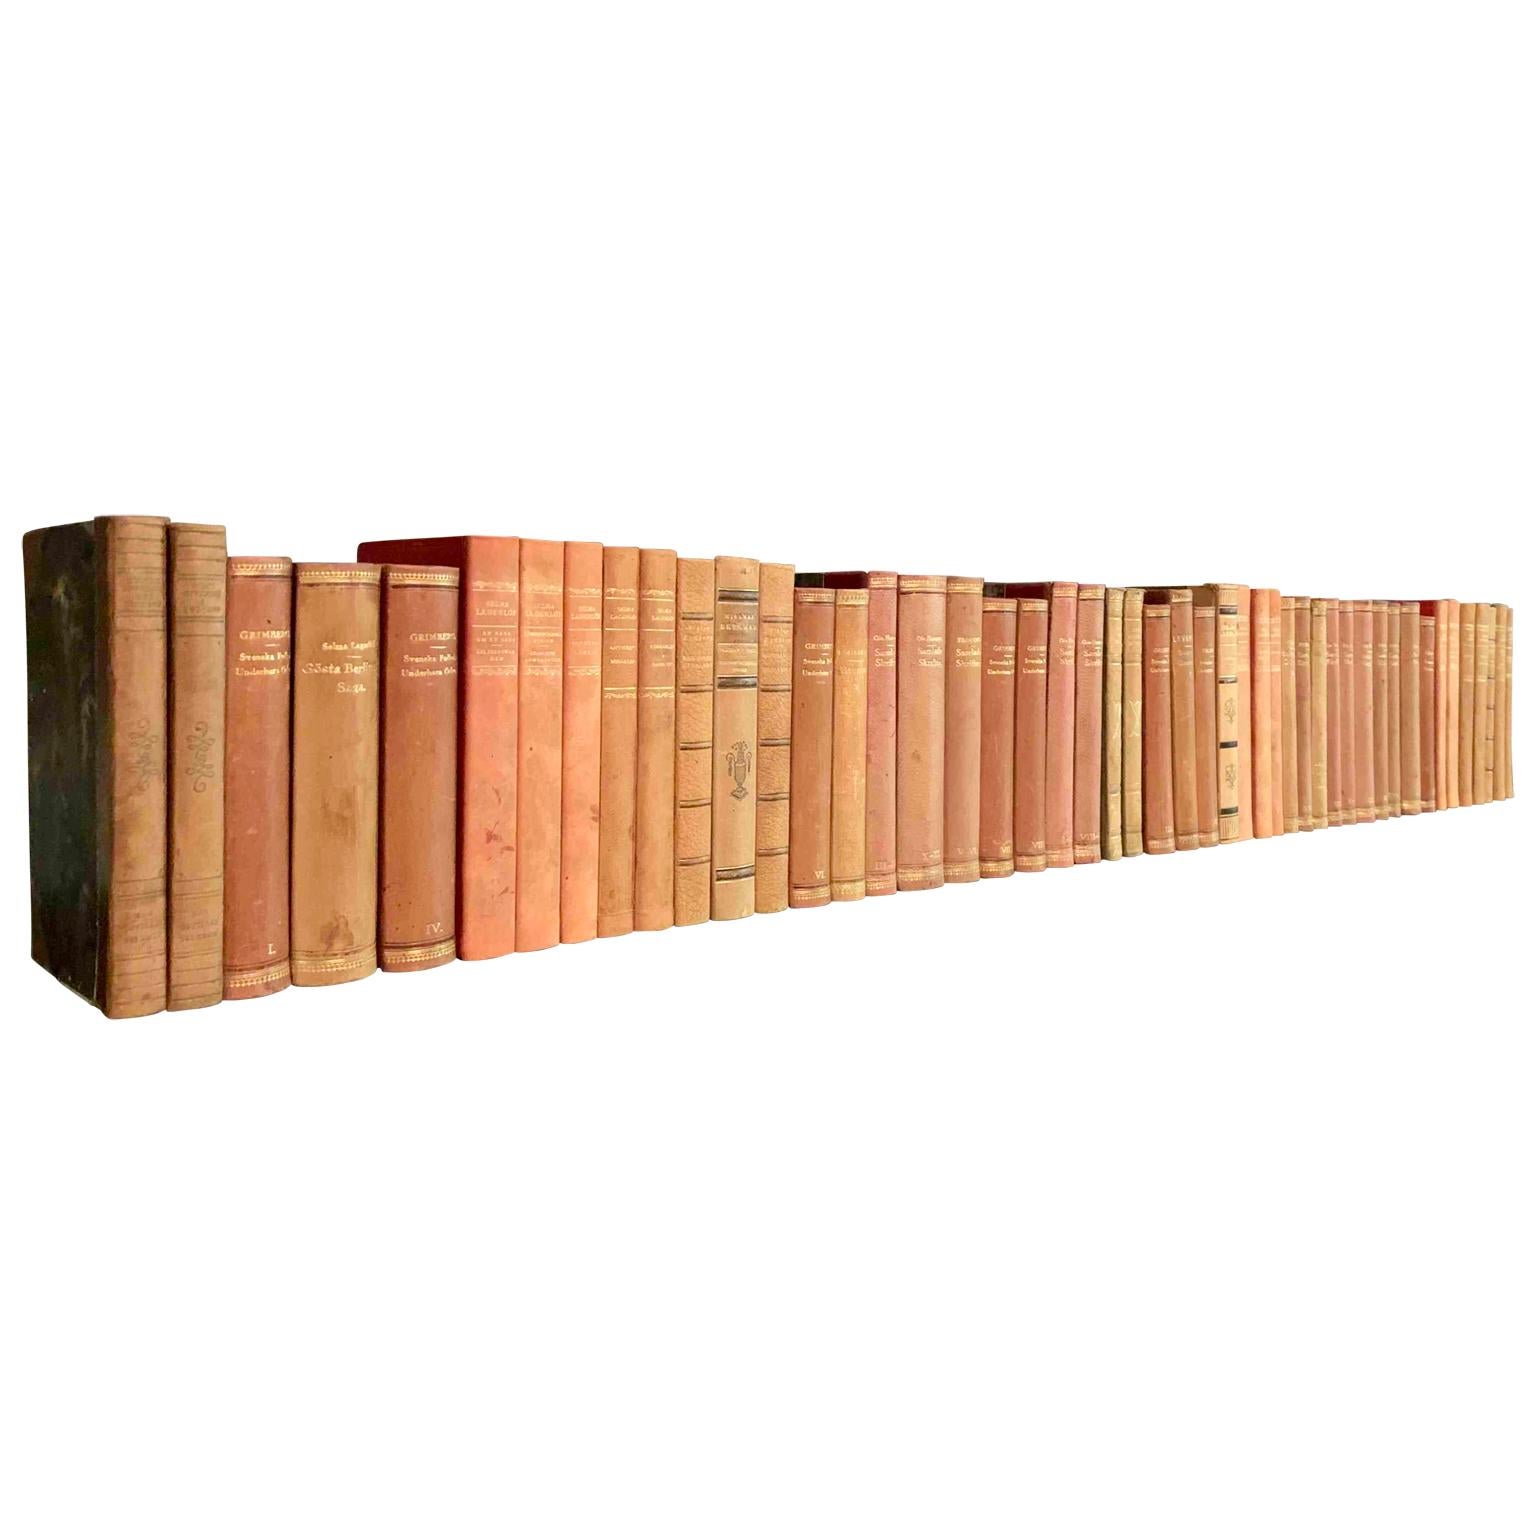 A collection of 48 Swedish decorative antique leather-bound library books

This lot of books on literature from Sweden are wrapped in beautiful vintage leather-bound covers, comprised of a selection of warm tones and gold leaf print embossing. The